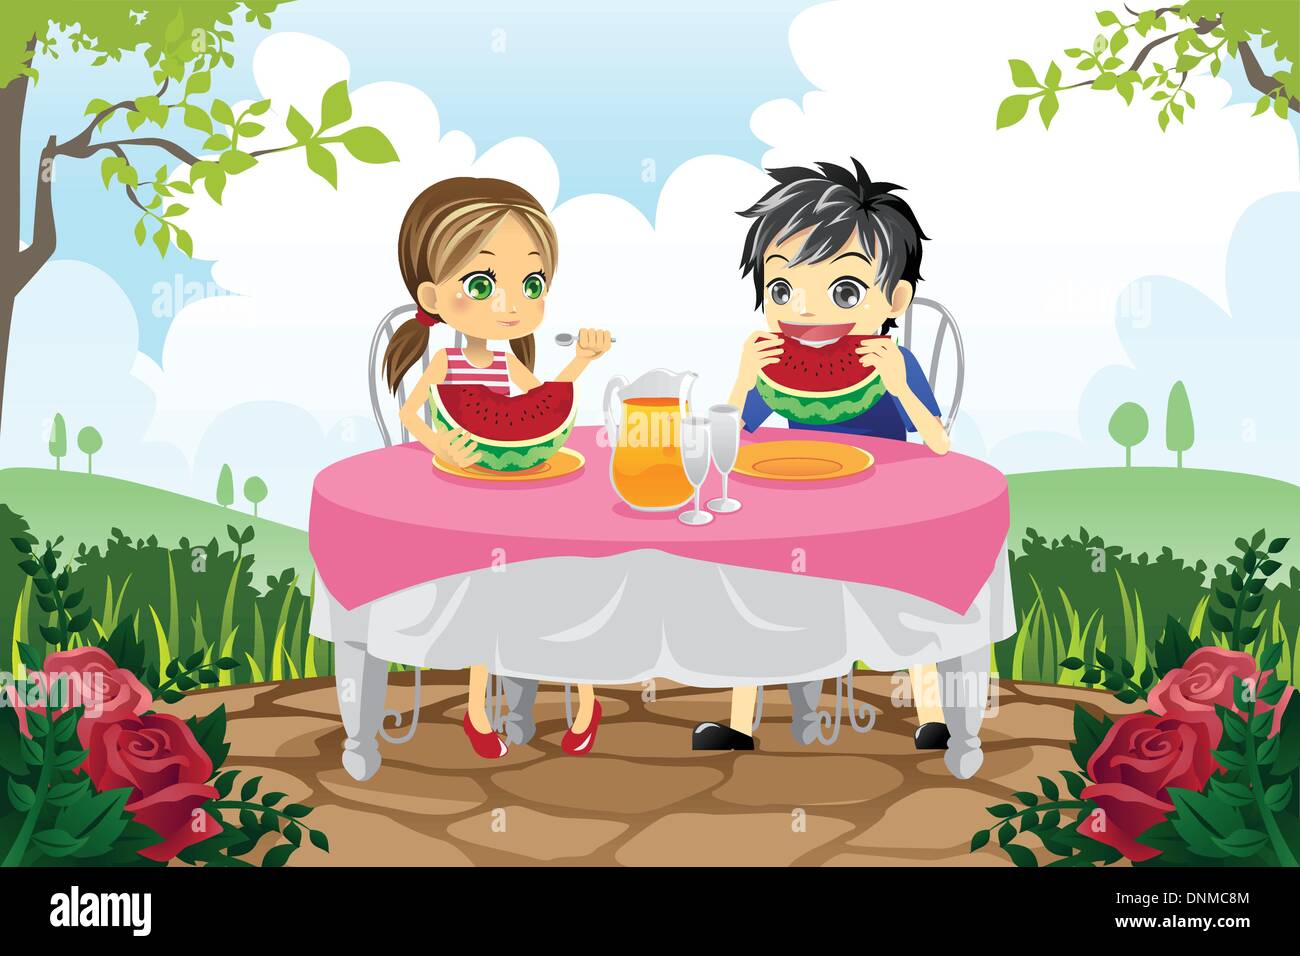 A vector illustration of two kids eating watermelon in a park Stock Vector